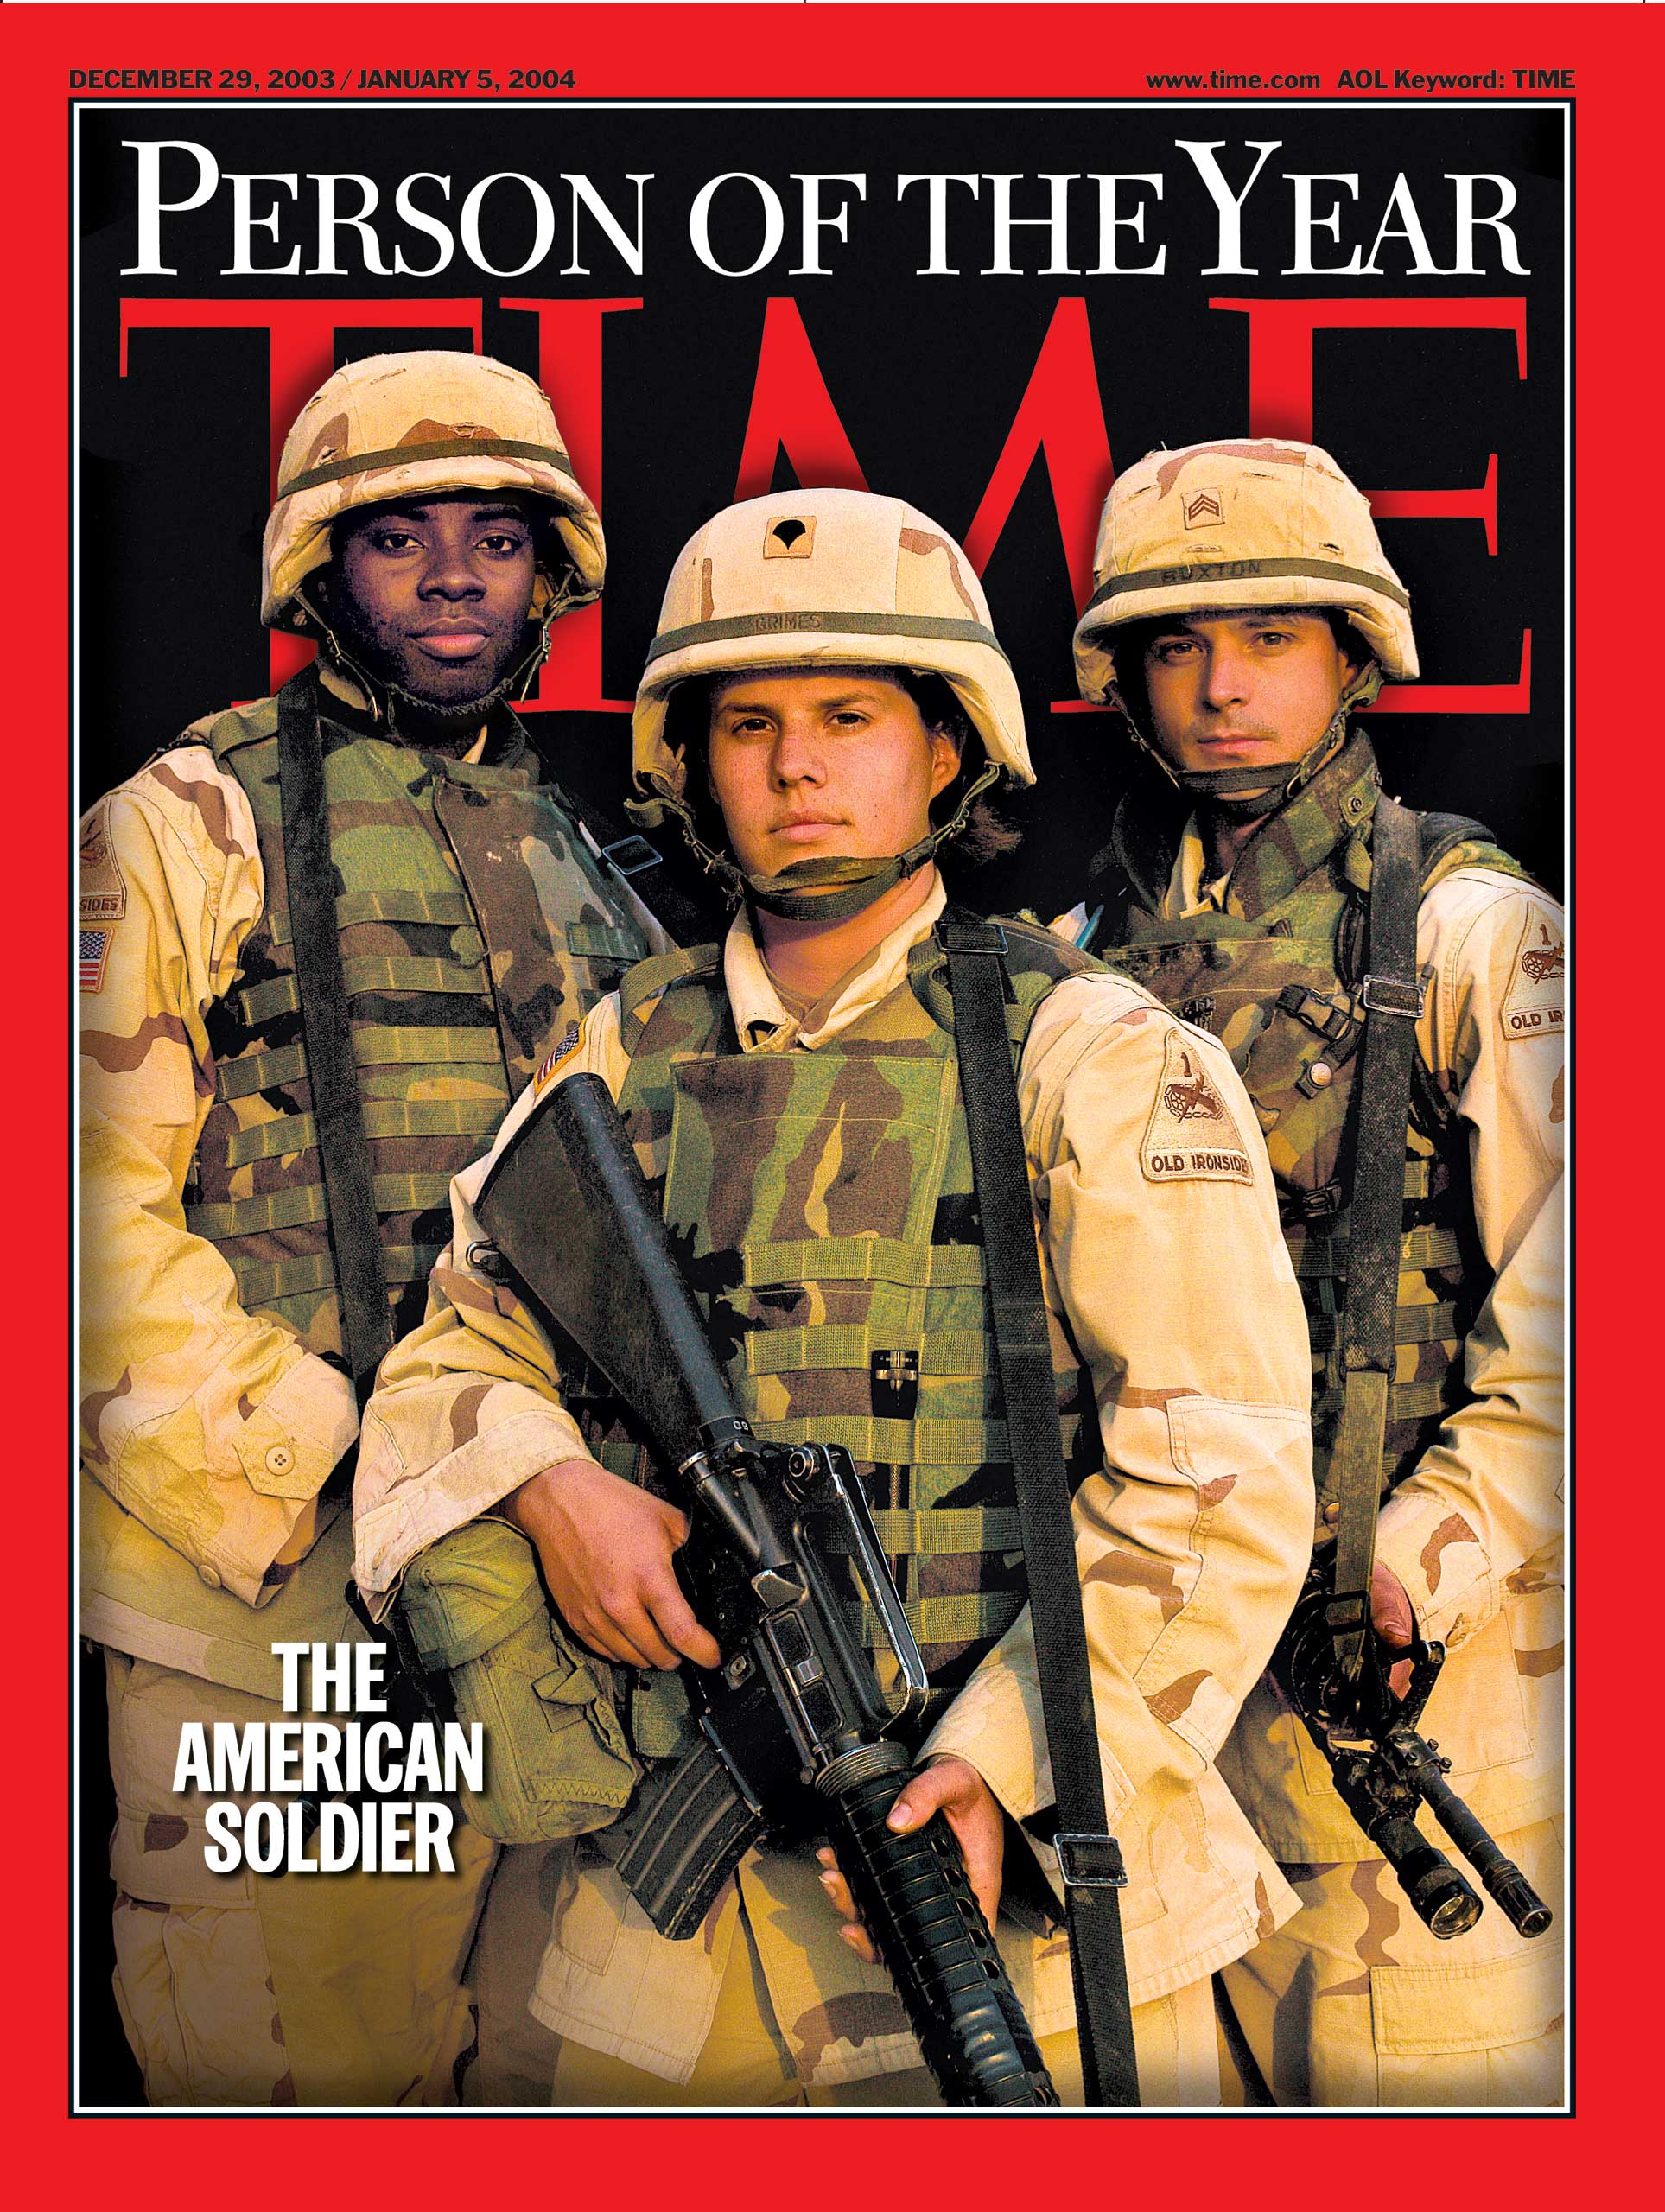 2003: The American Soldier